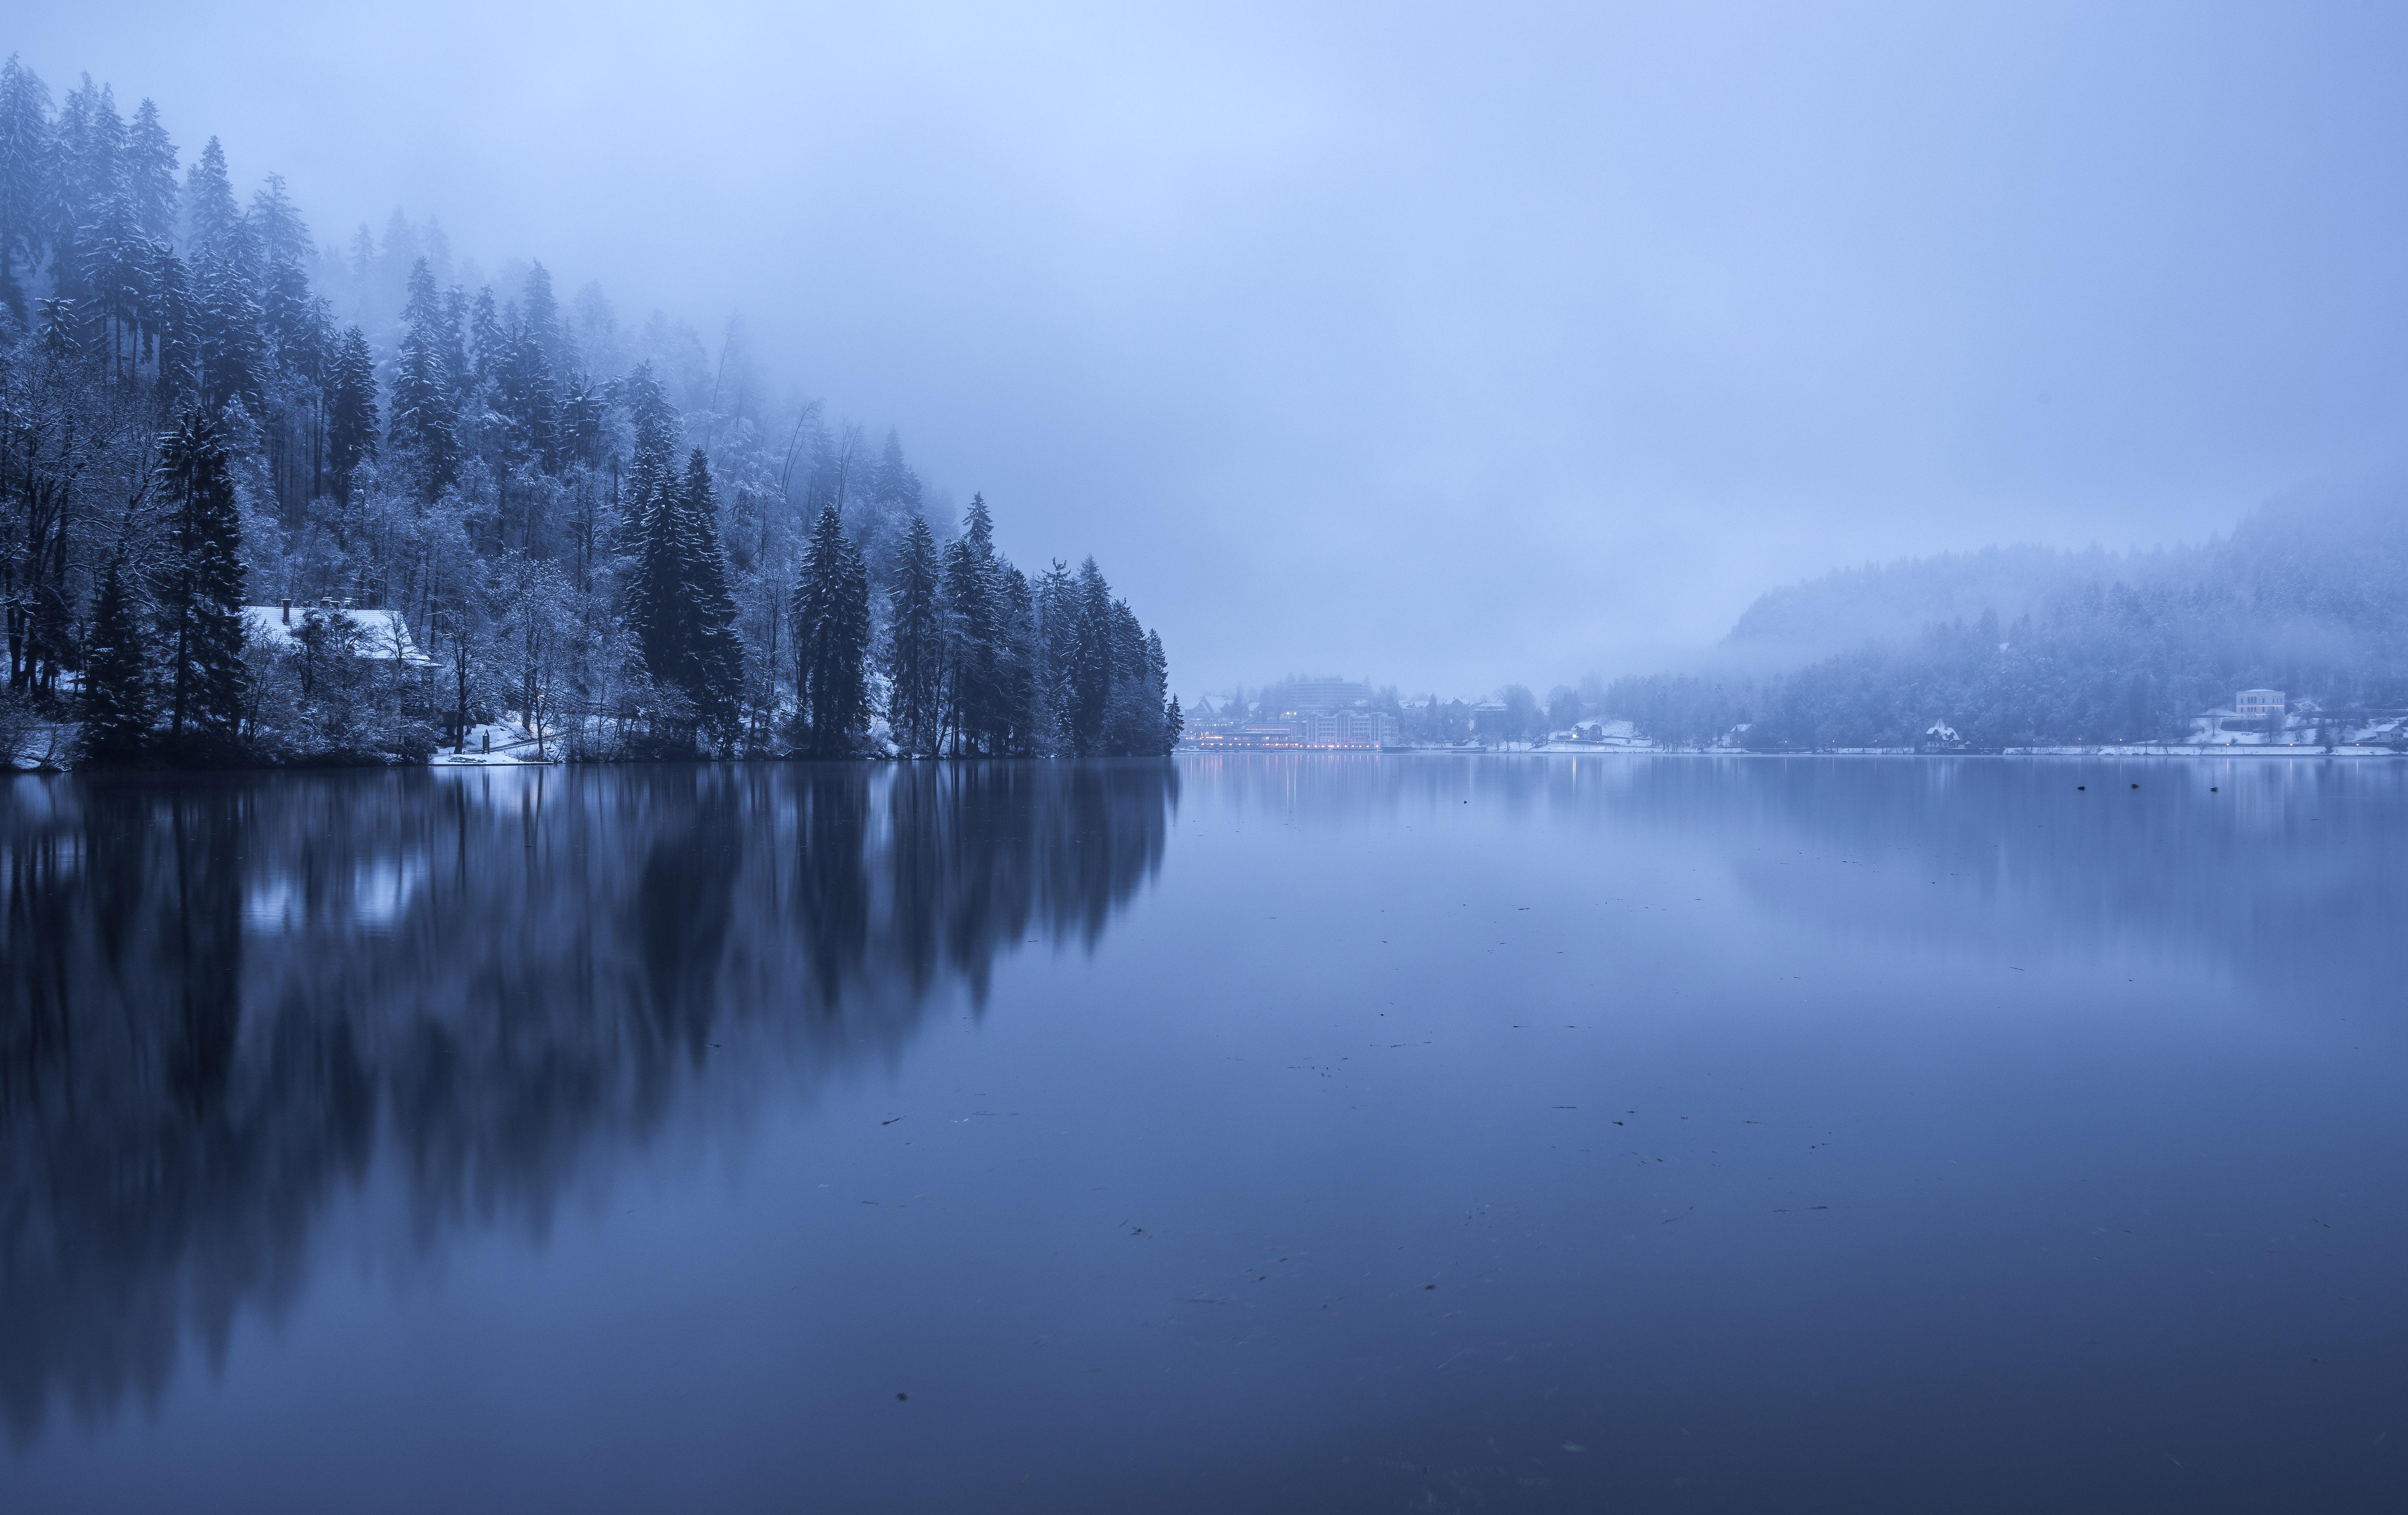 Dreamy Pixel. Lake Bled on a foggy and cloudy winter day